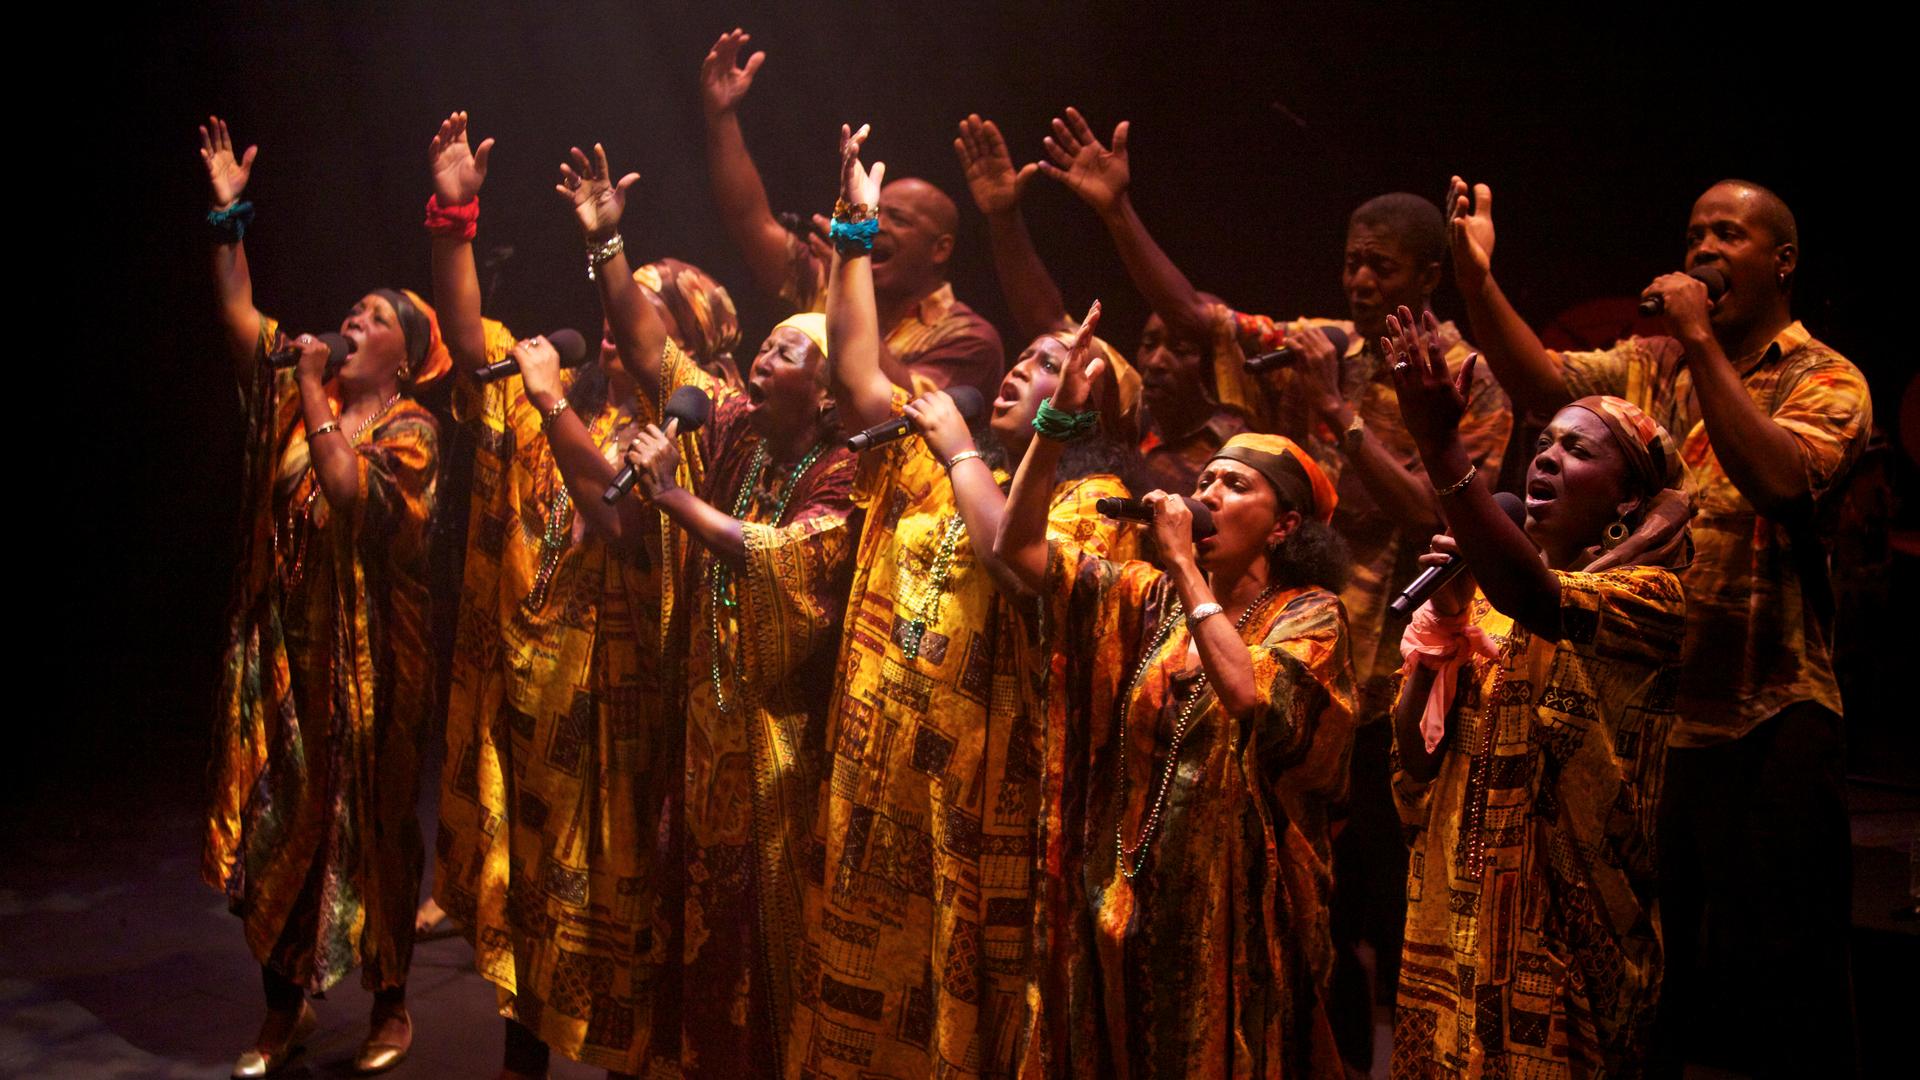 The Creole Choir of Cuba, who sing impassioned songs influenced by both traditional gospel and Caribbean music.